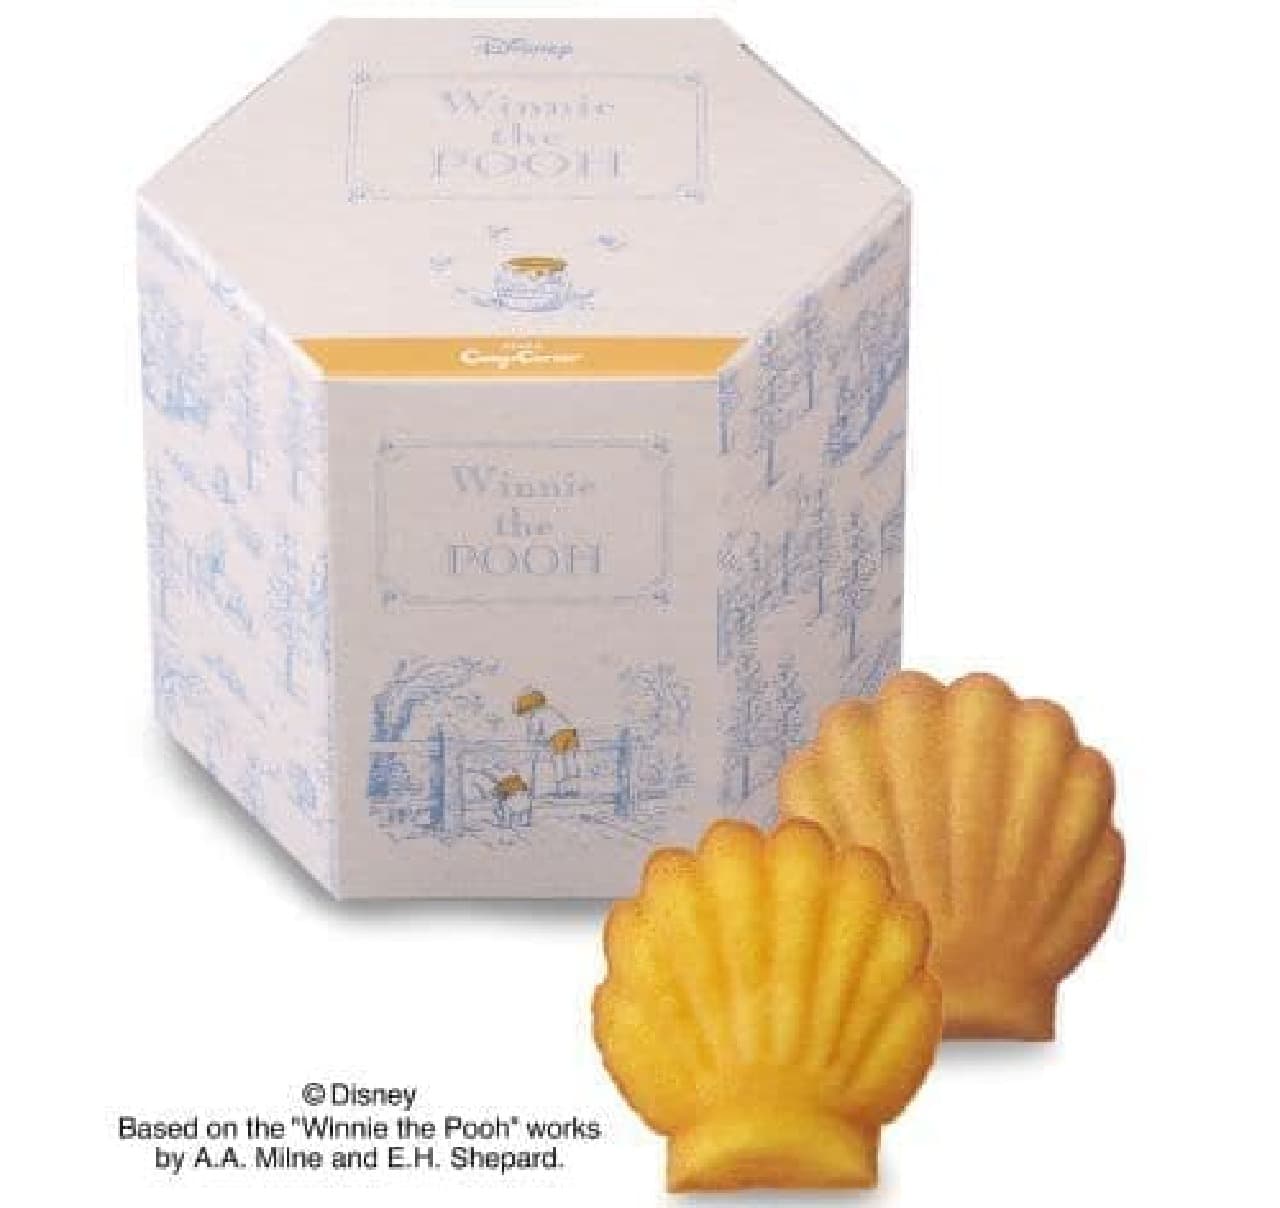 At each Cozy Corner store (excluding some stores), 3 sweets gifts with the motif of "Winnie the Pooh" will be on sale.